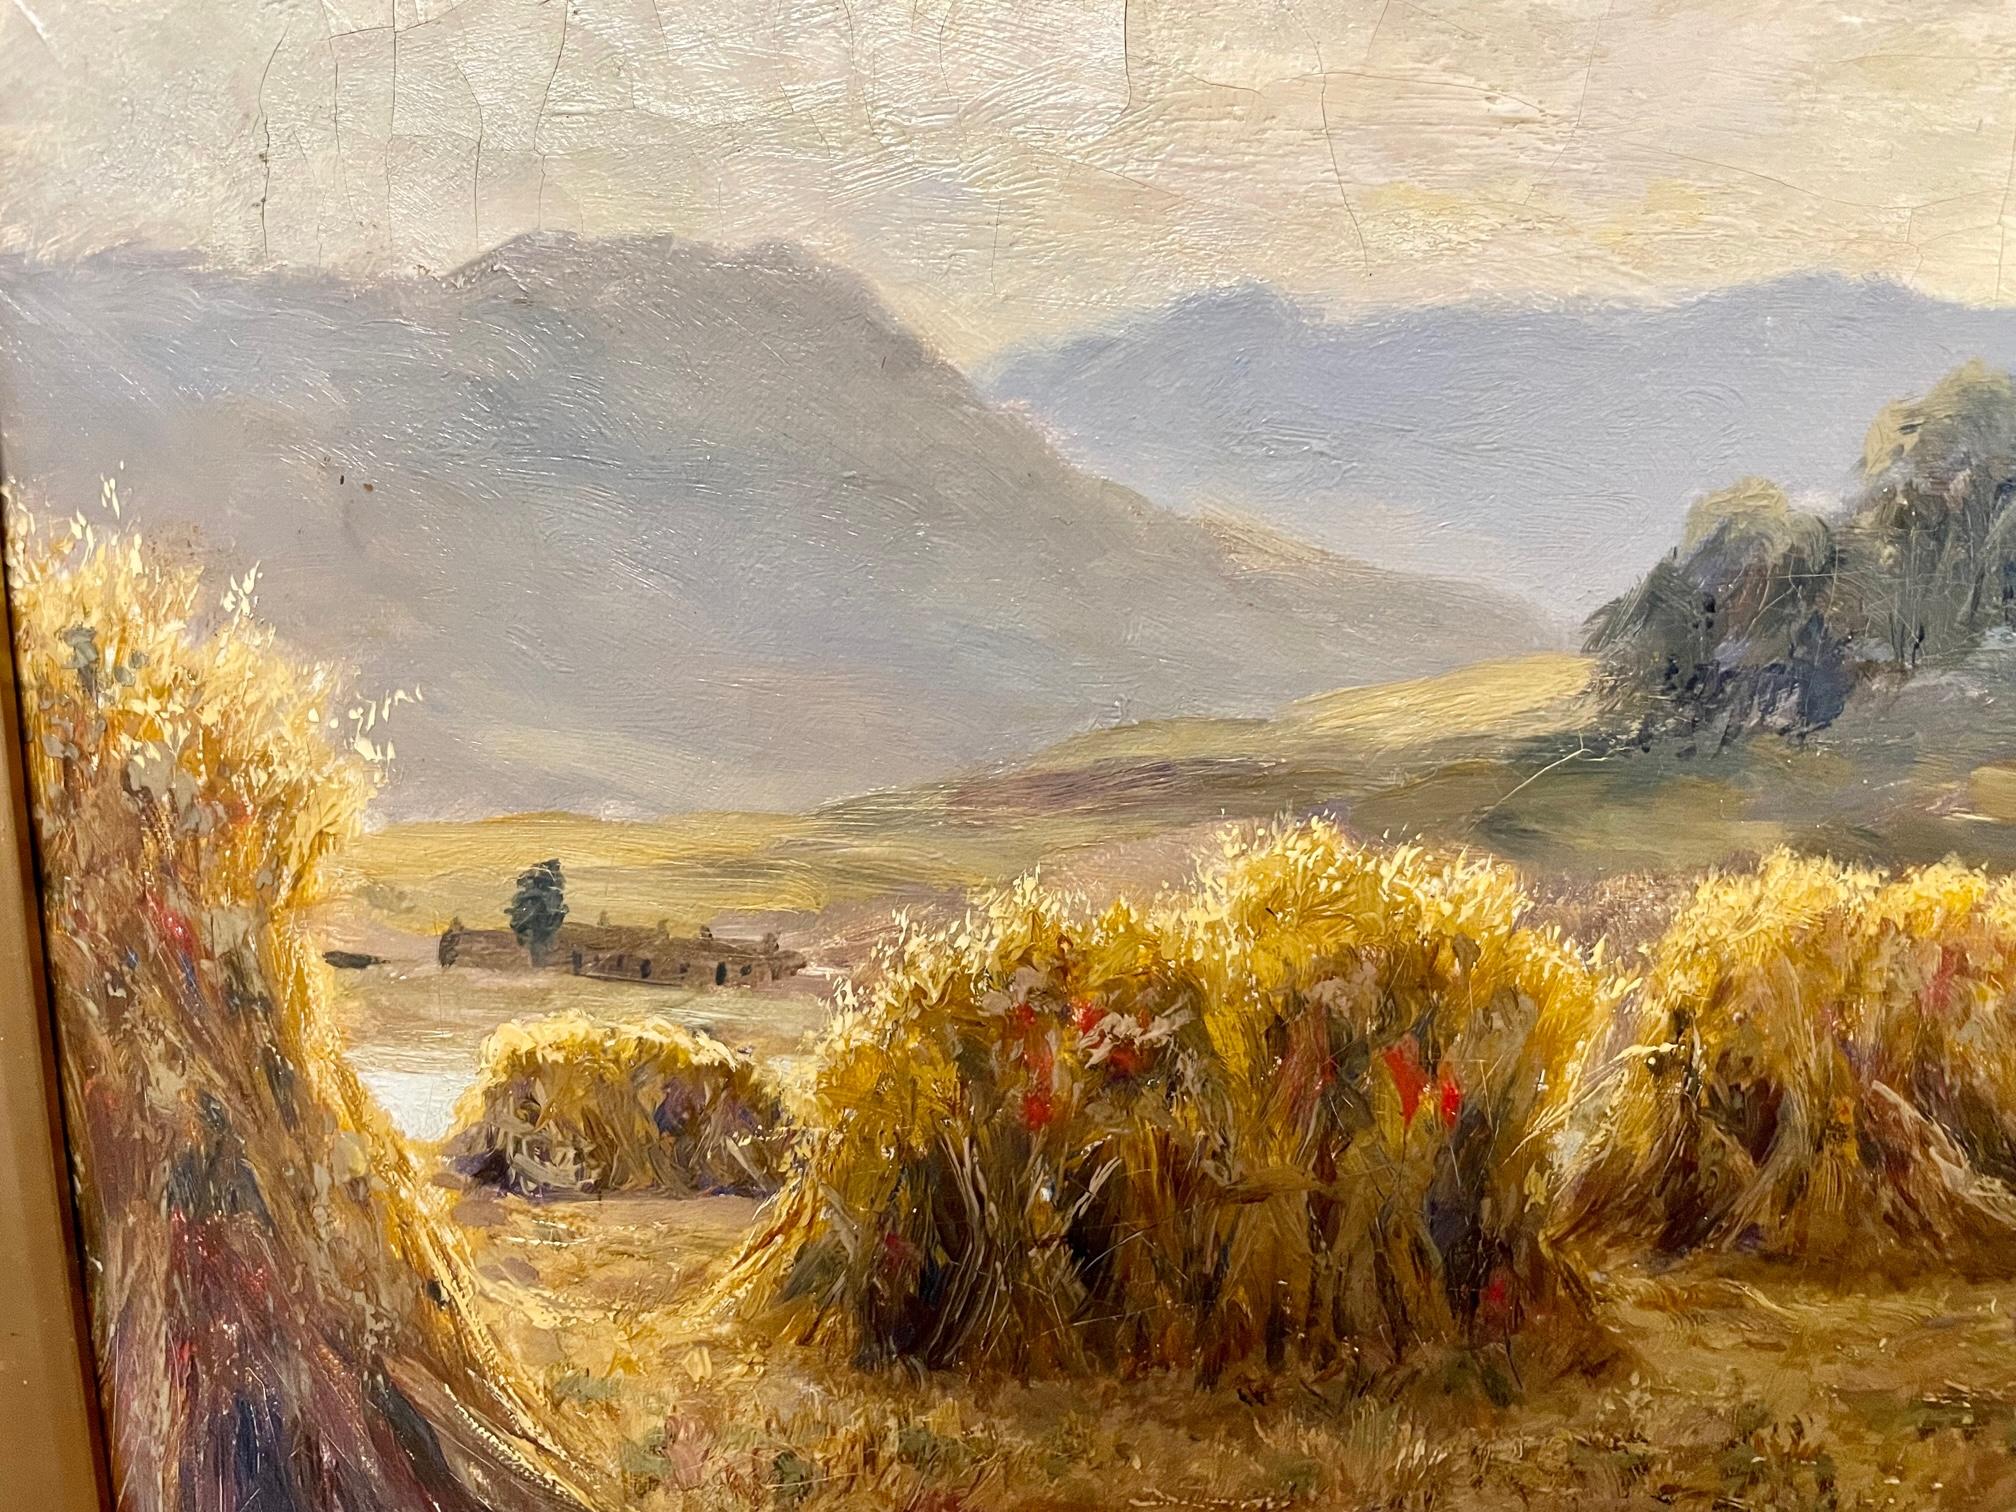 Haystacks in the Highlands - Painting by Duncan Cameron